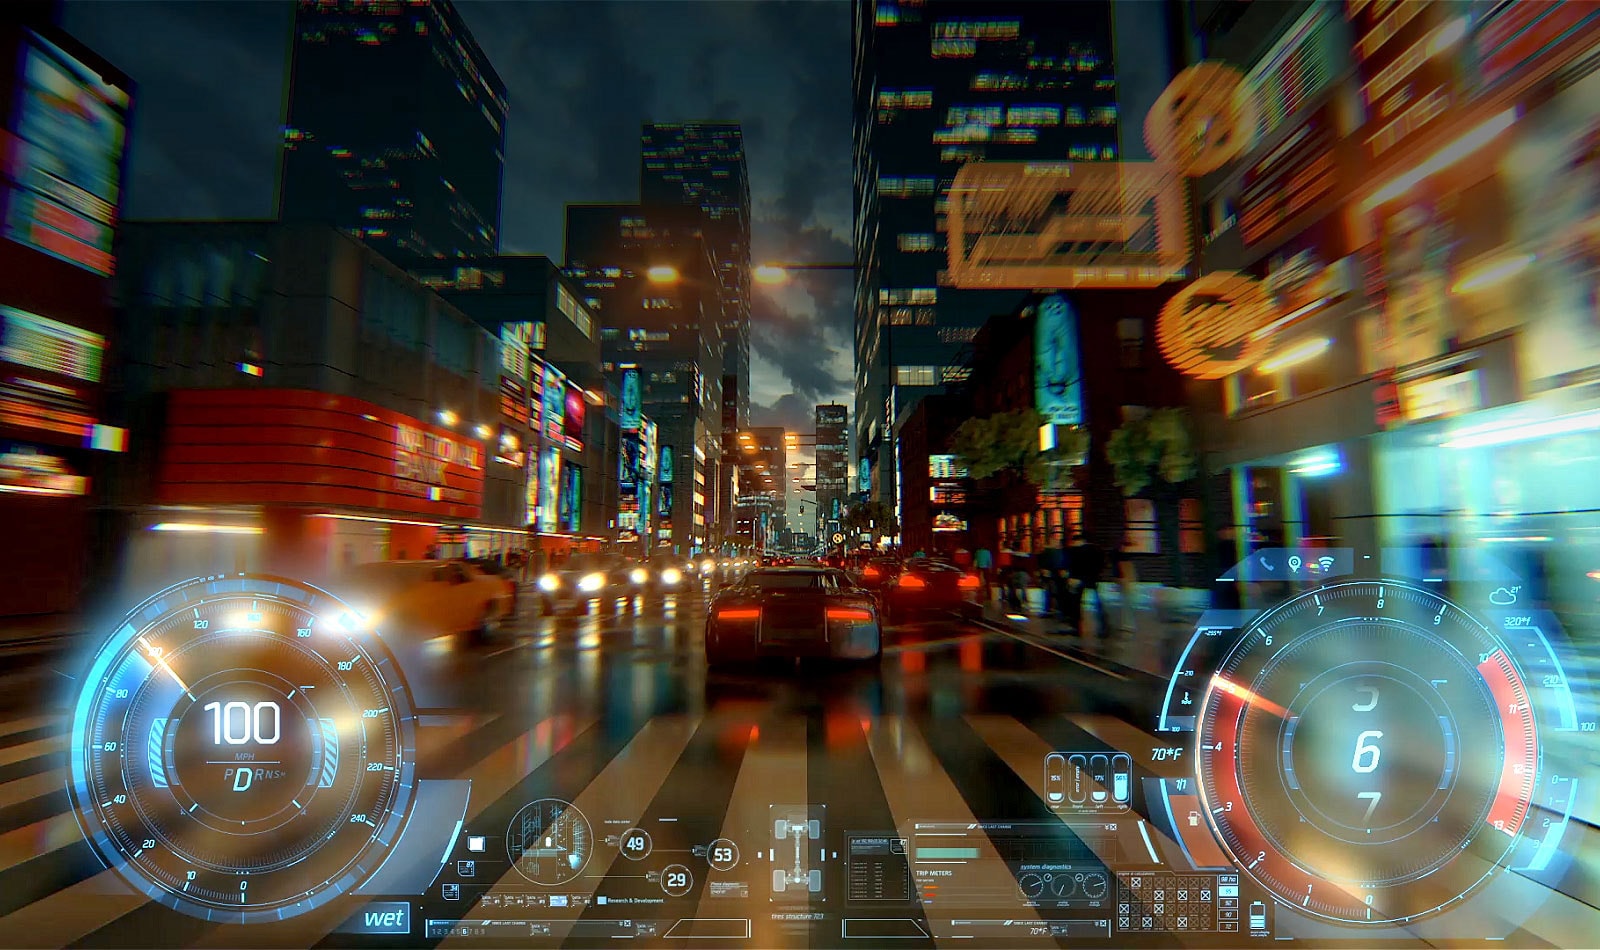 A video that follows a car from behind in a video game as it drives through a lit street at dusk.